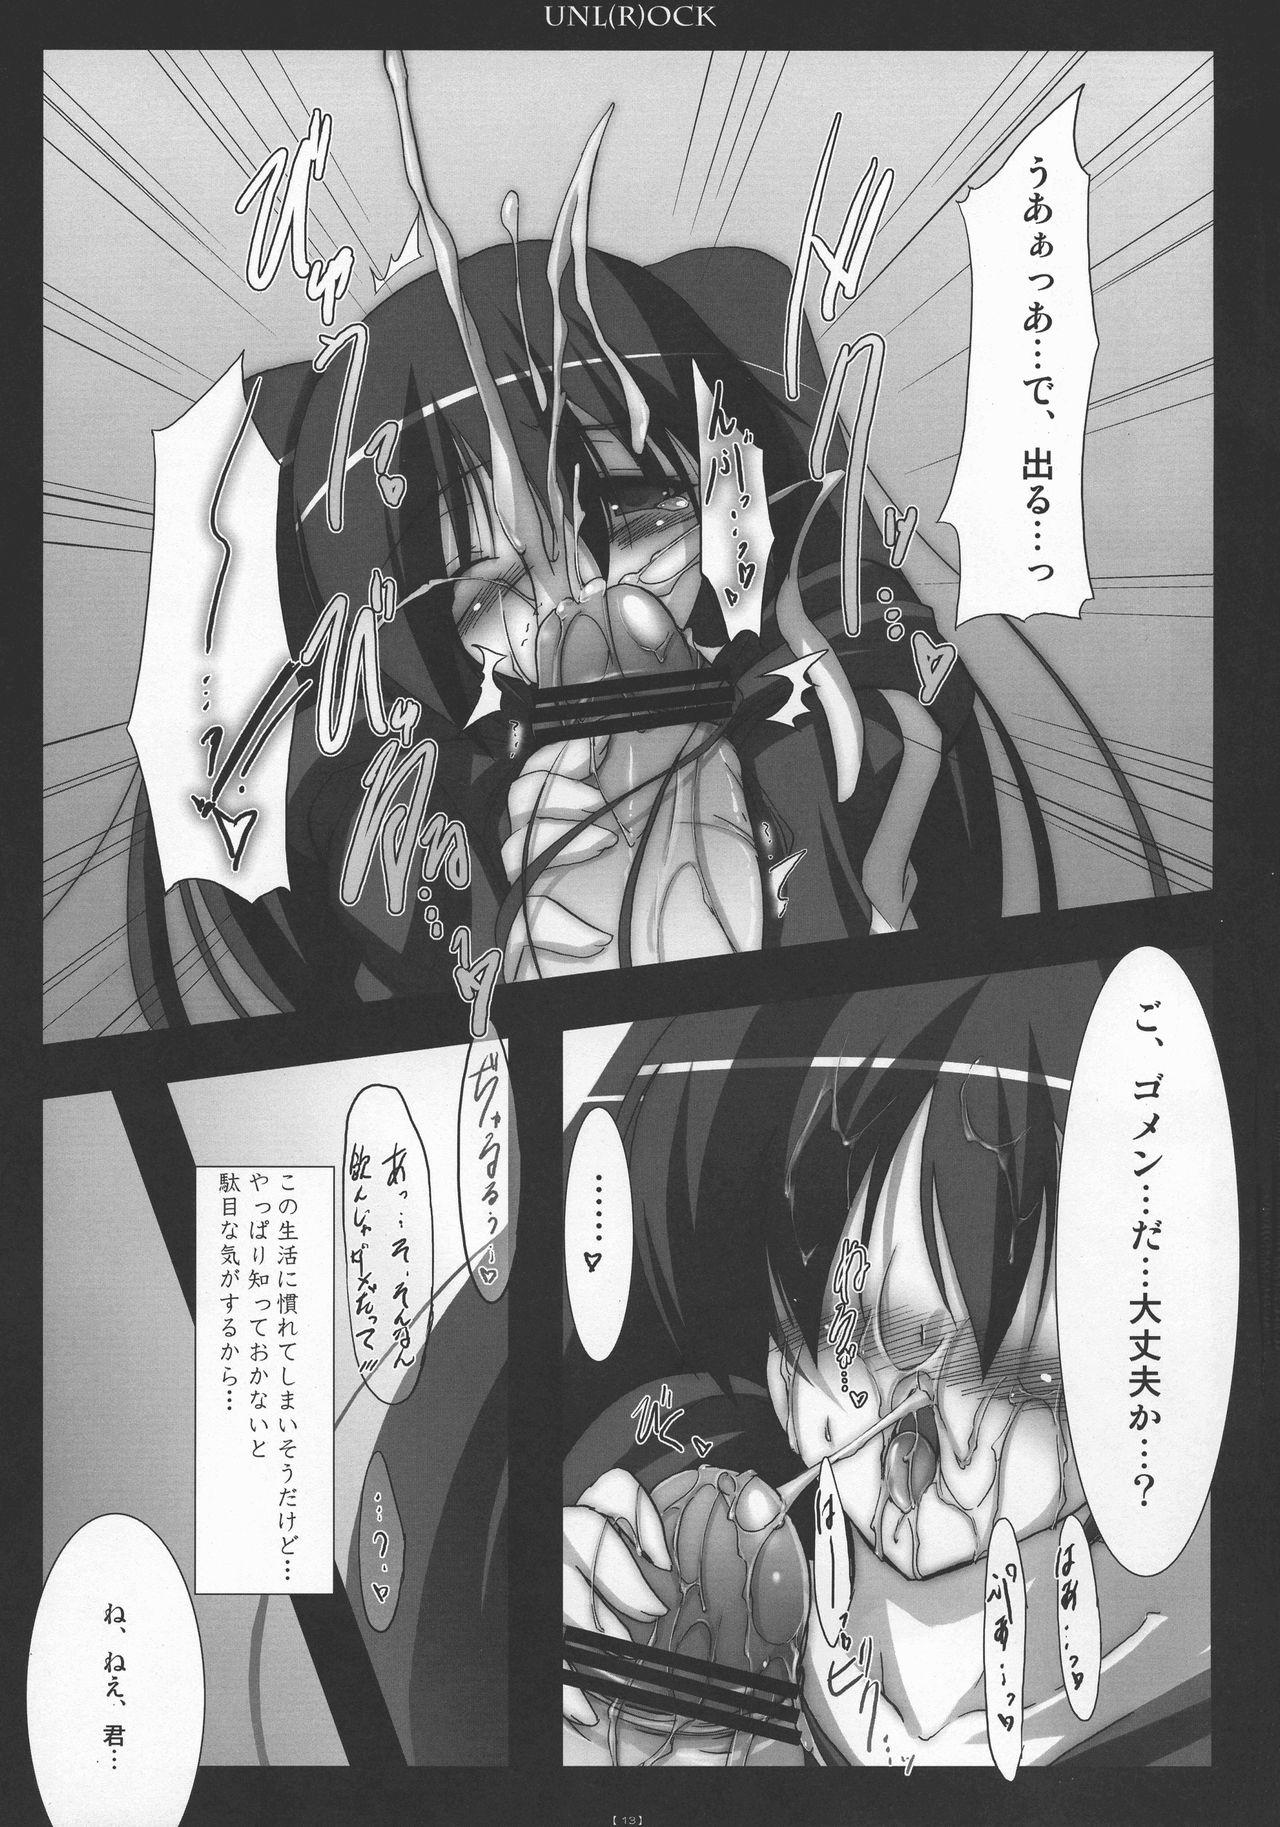 Free 18 Year Old Porn (ComiComi13) [C.R's NEST (C.R)] UNL(R)OCK (BLACK ROCK SHOOTER) - Black rock shooter Lovers - Page 12